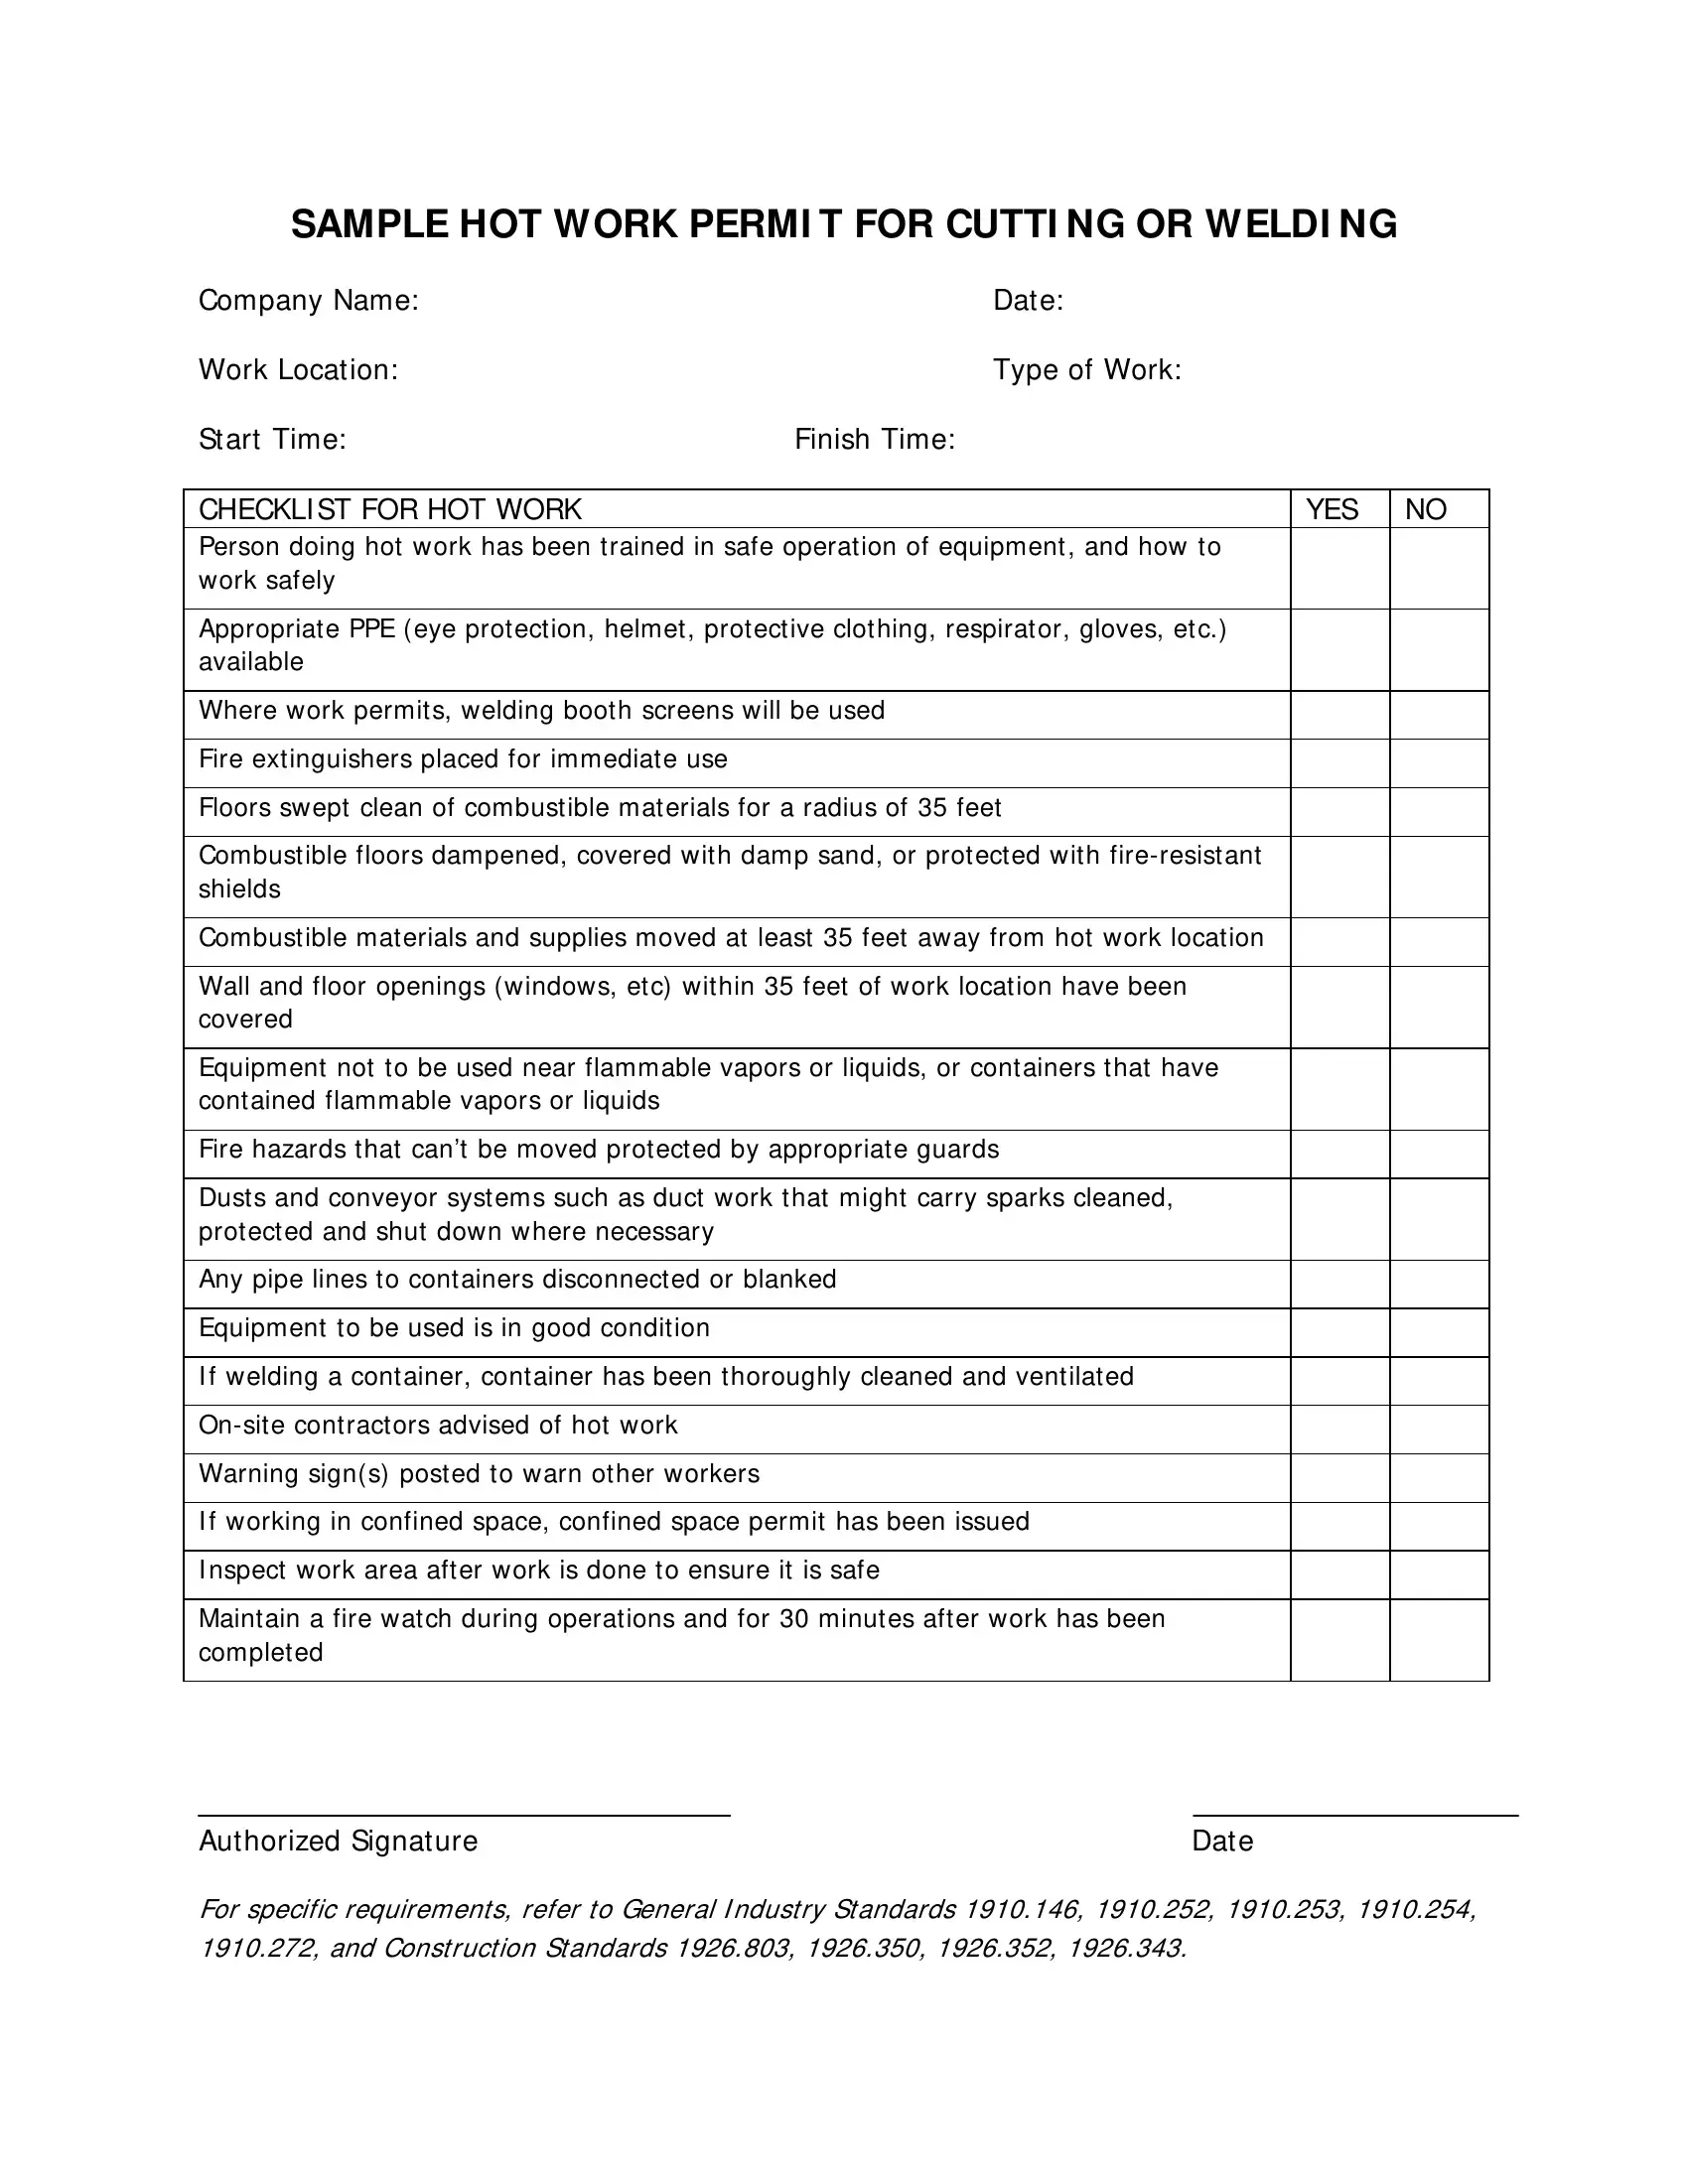 hot-work-permit-sample-form-fill-out-printable-pdf-forms-online